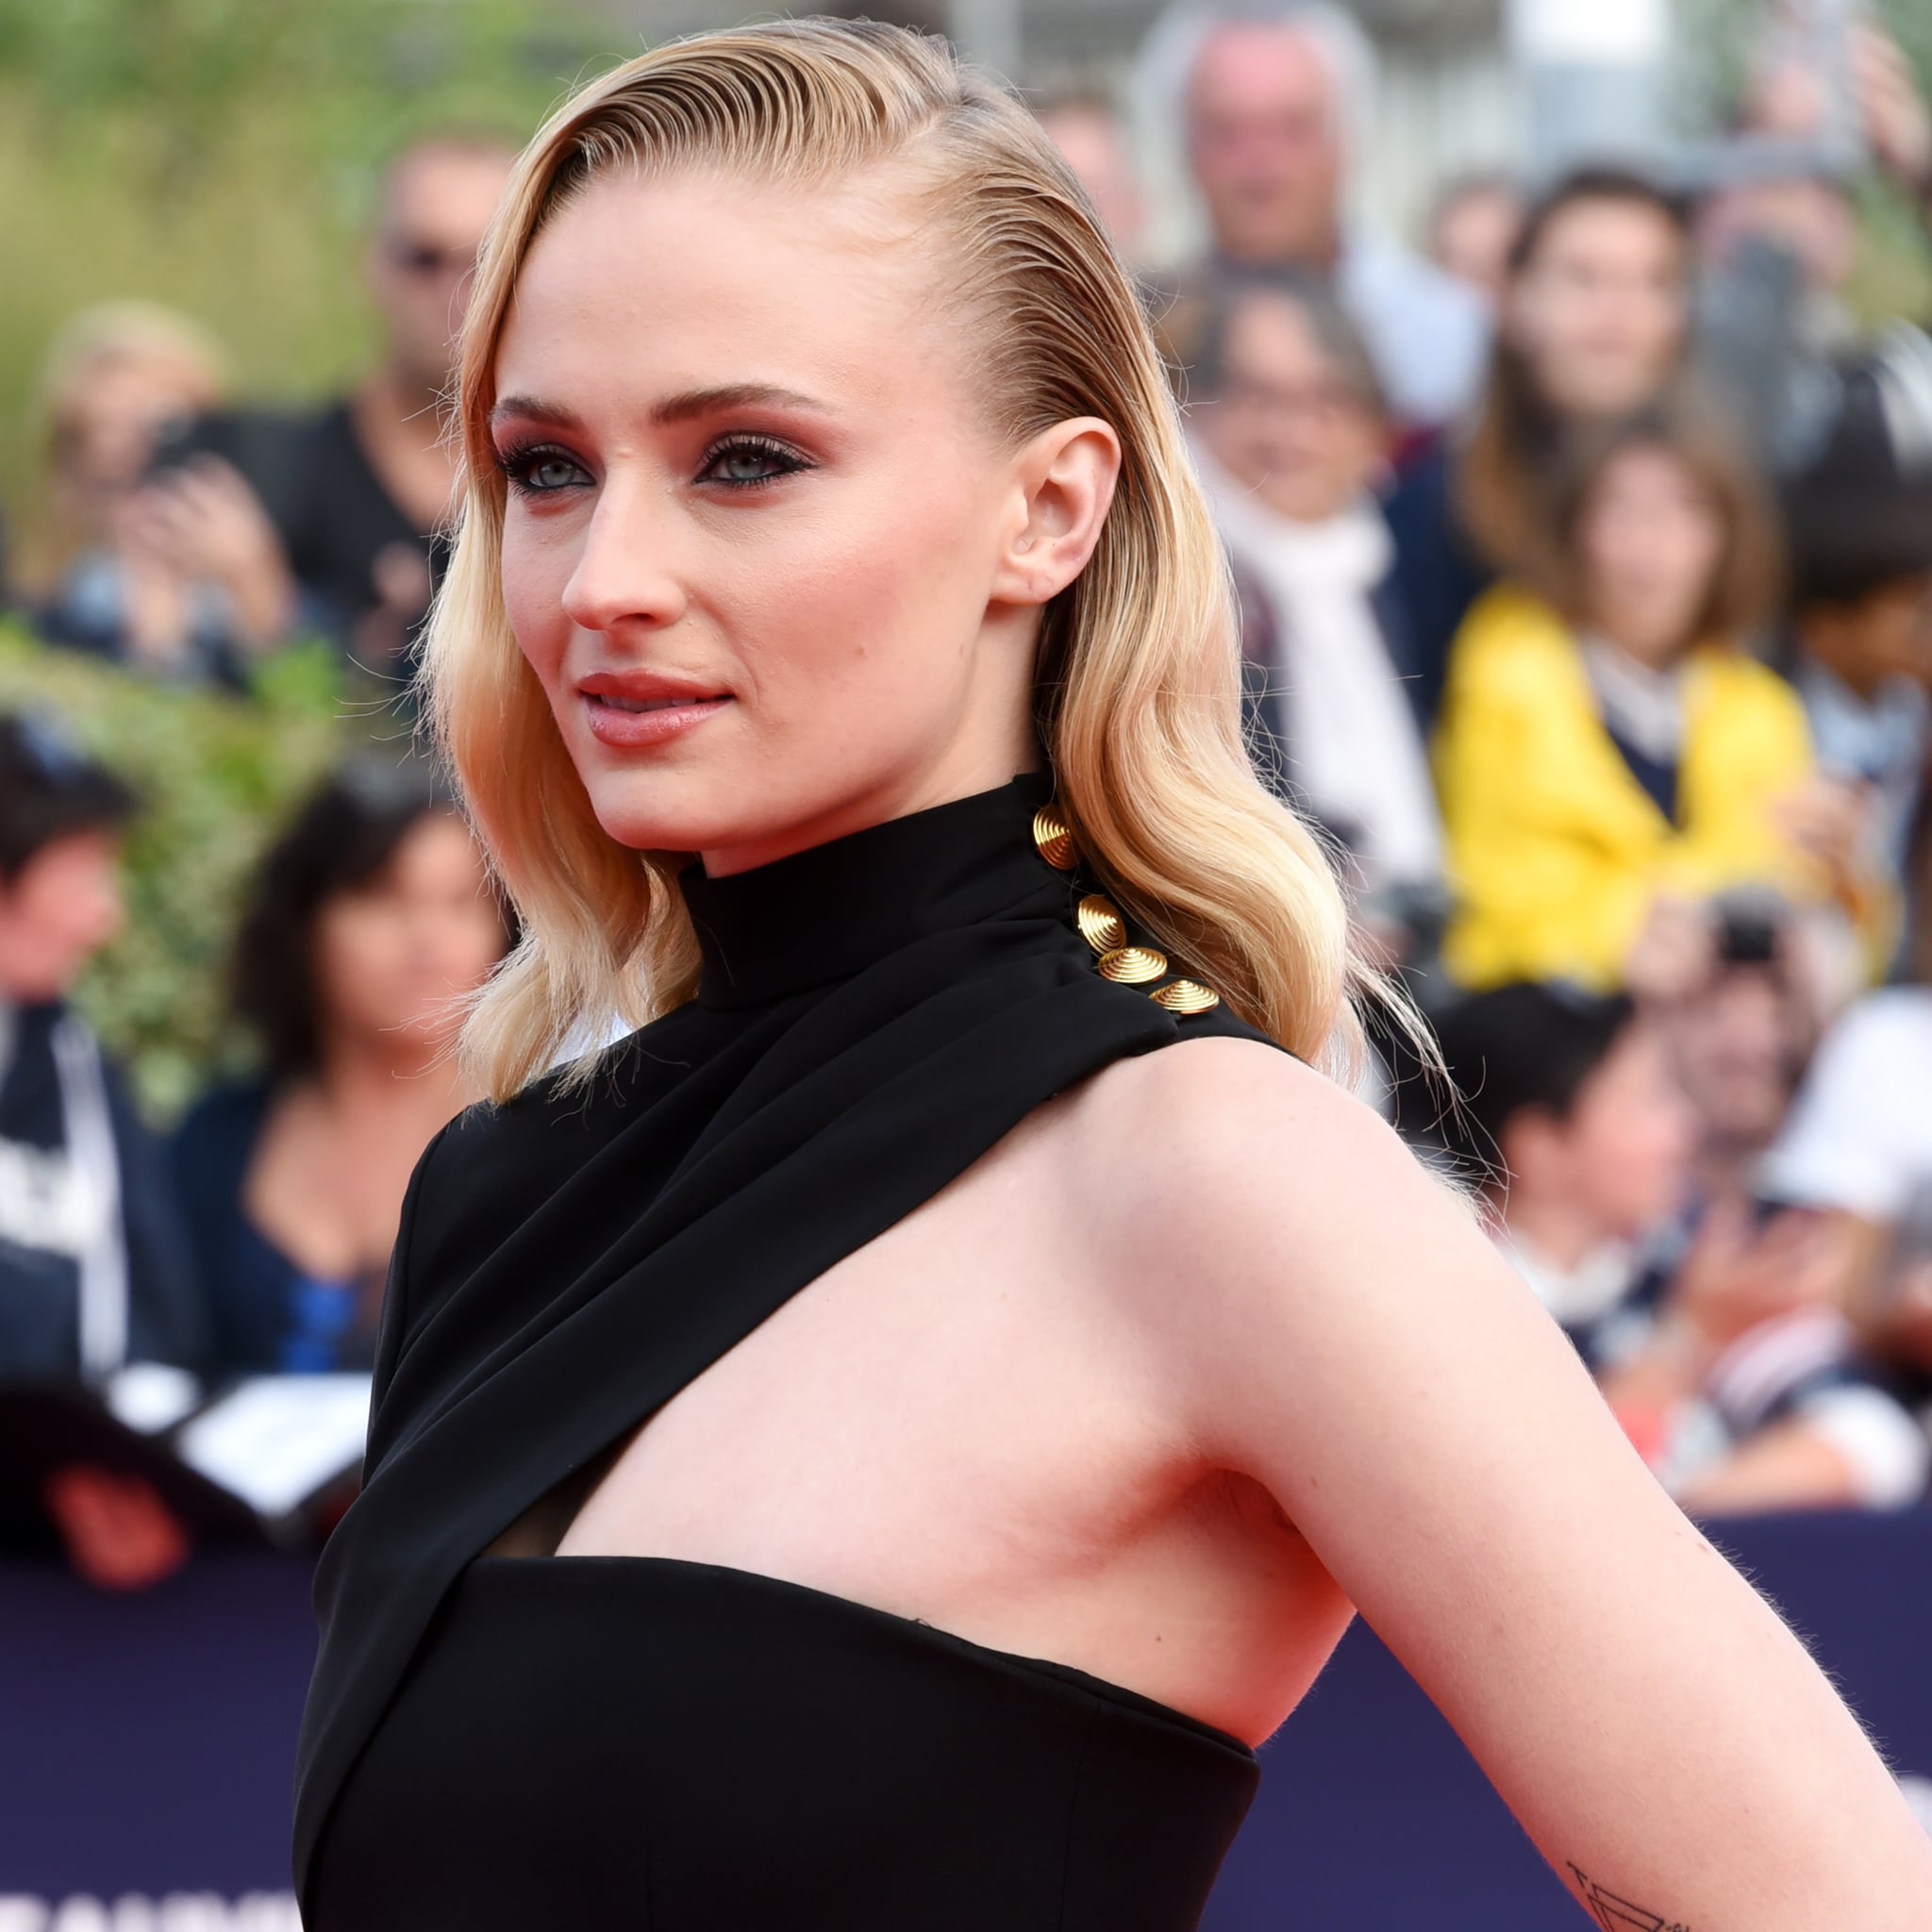 Sophie Turner Goes Comfy-Chic Style in Pillow Boots by Louis